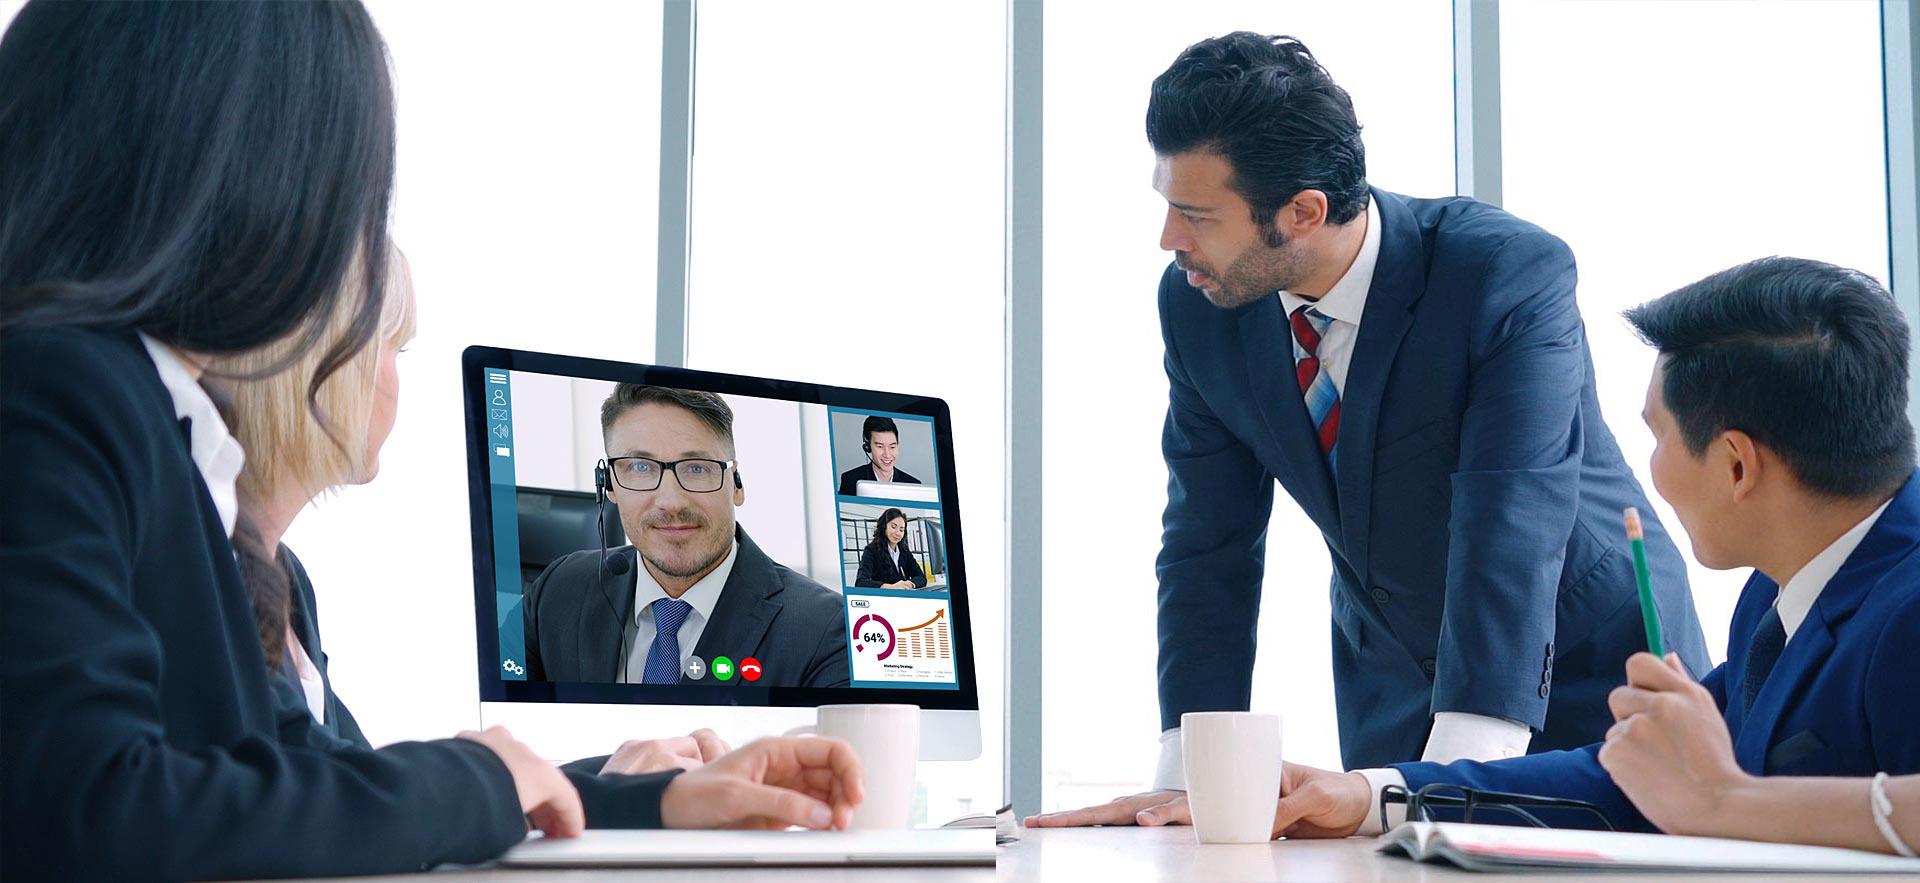 A corporate meeting done remotely.